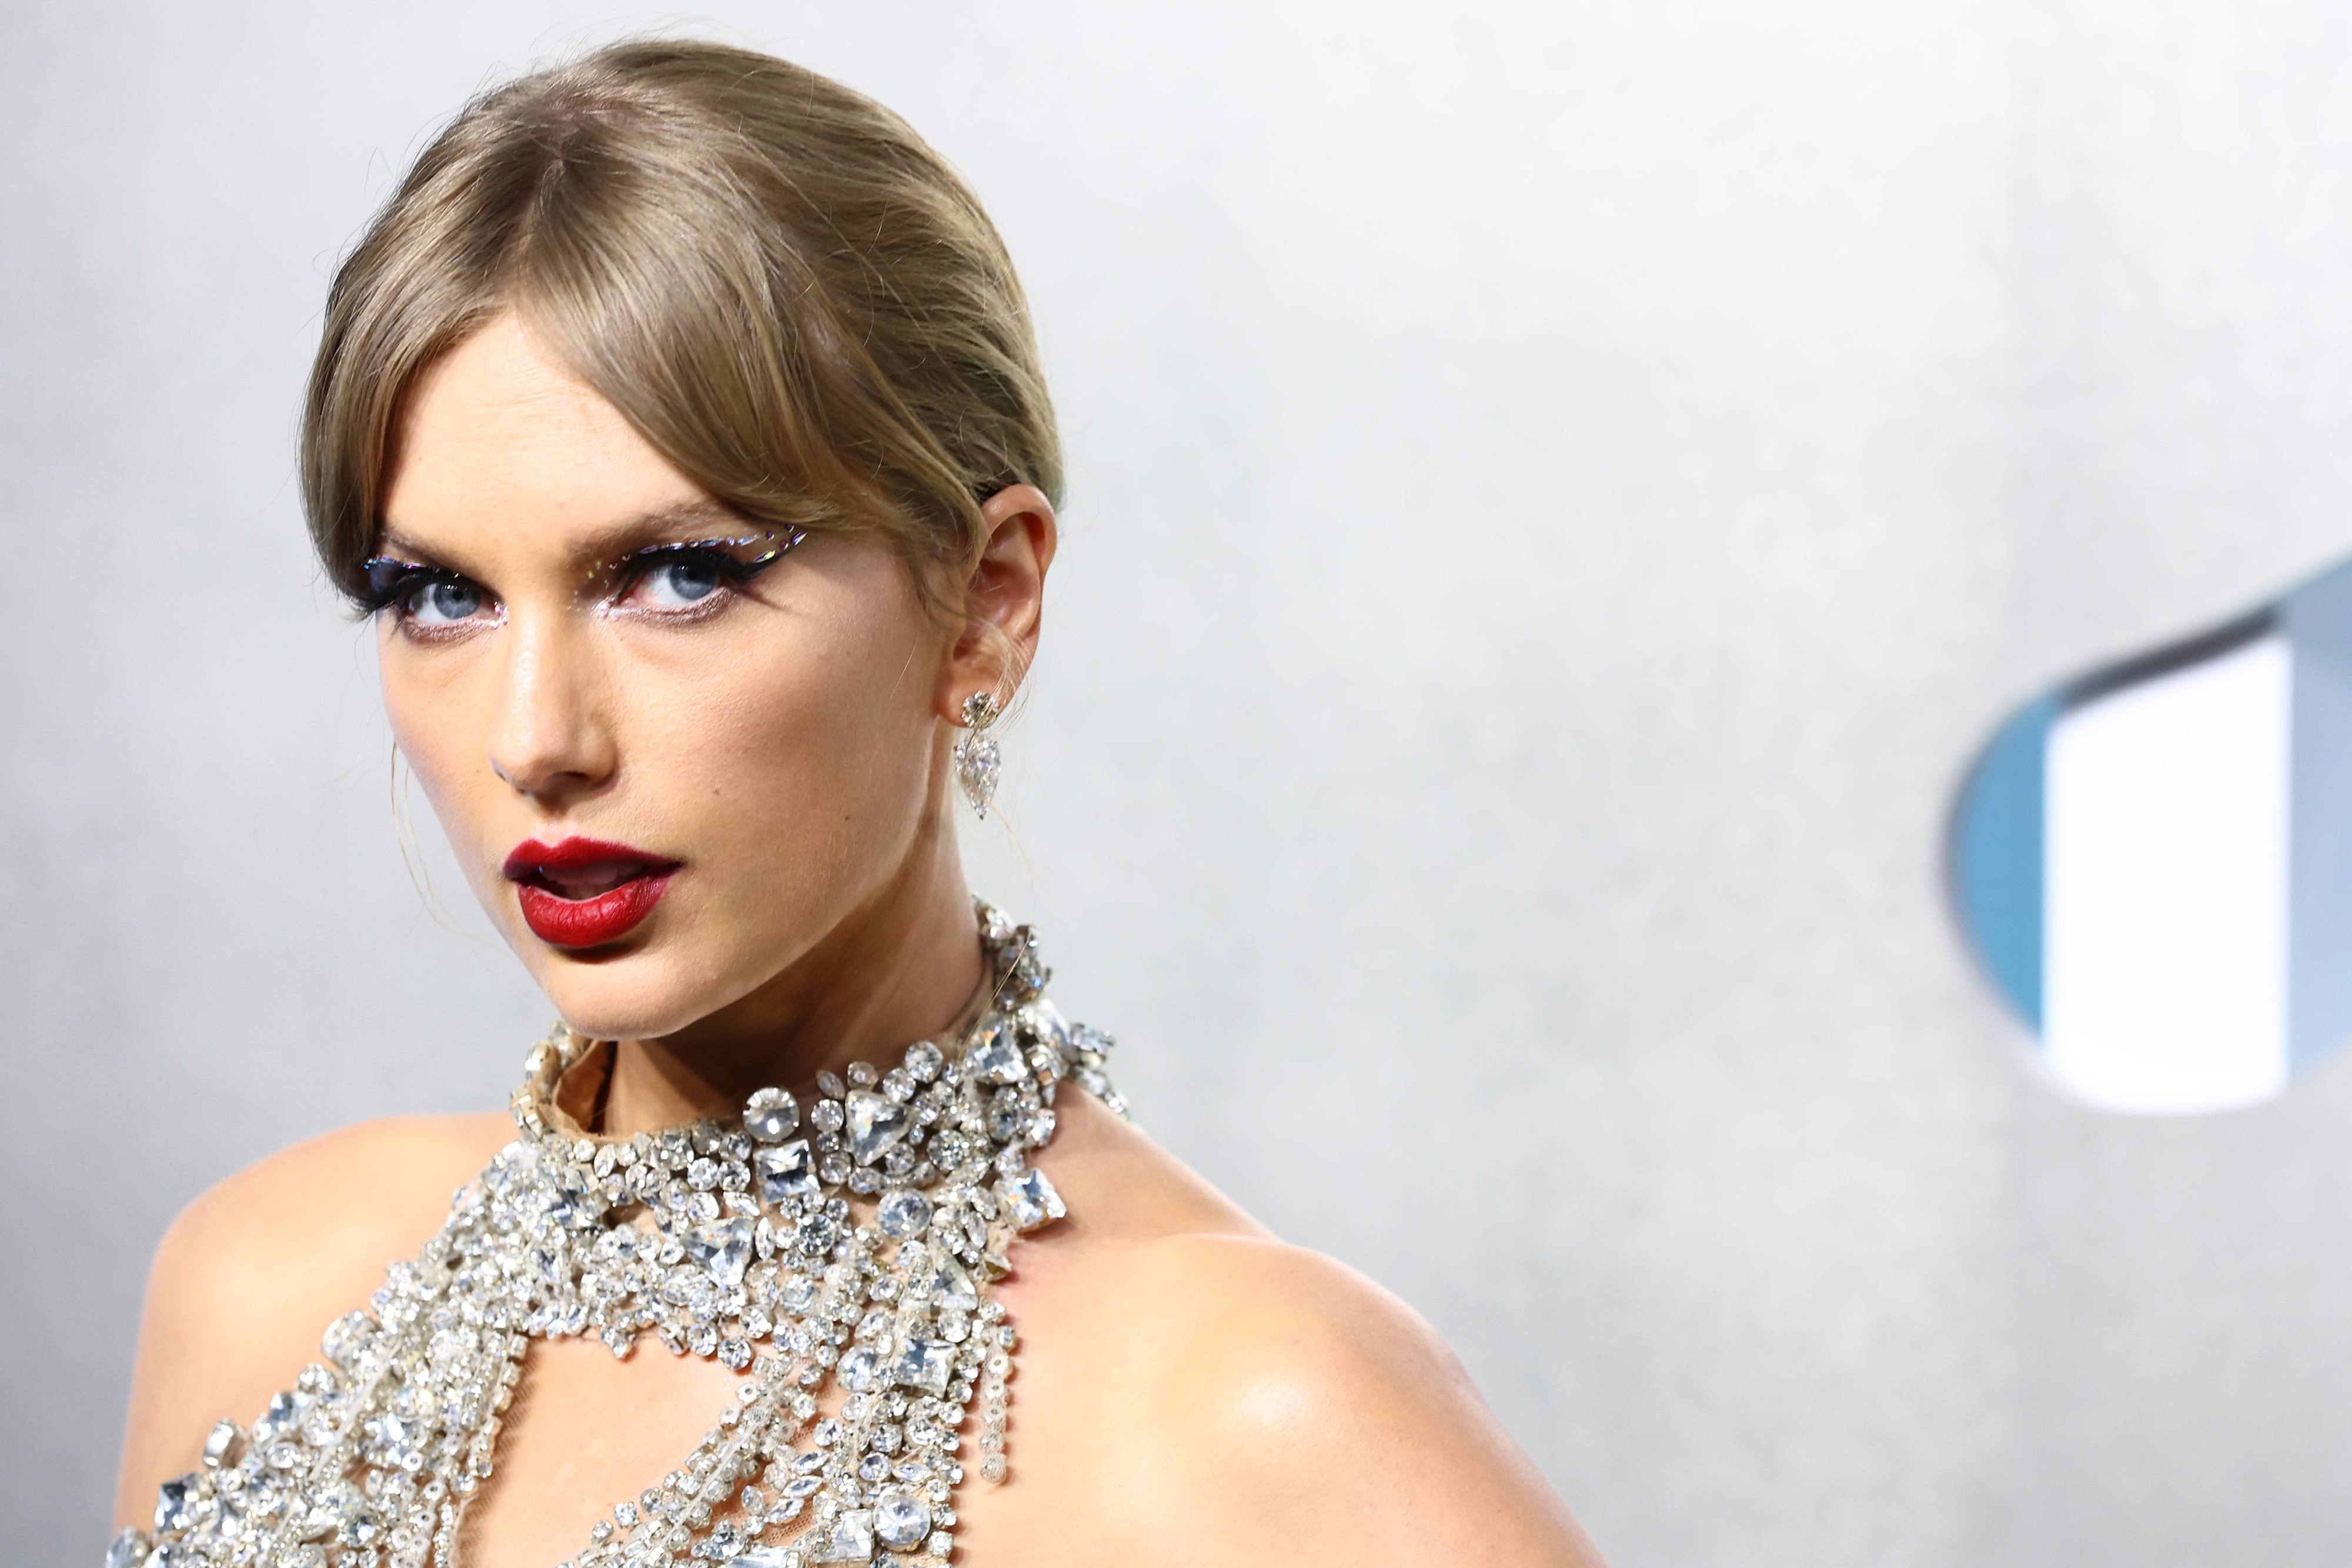 Taylor Swift in a sparkling jeweled dress and earrings